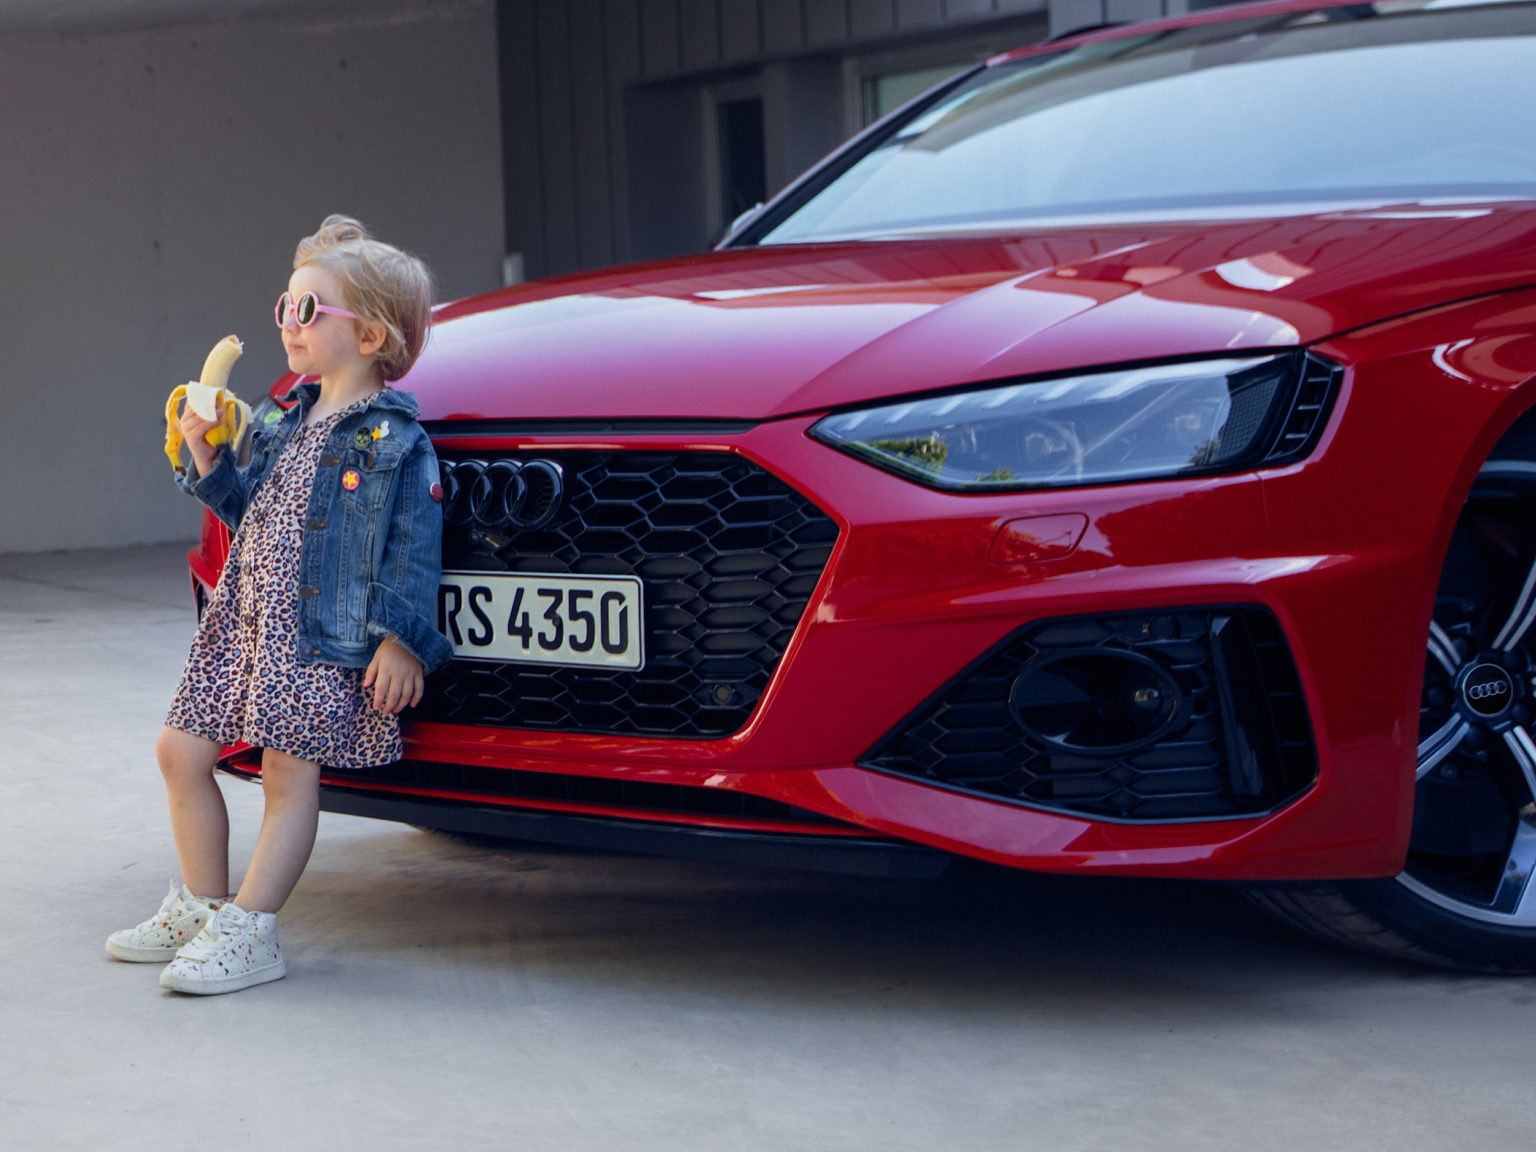 This image of a young child was considered so perverted by some that Audi decided to apologize for it.